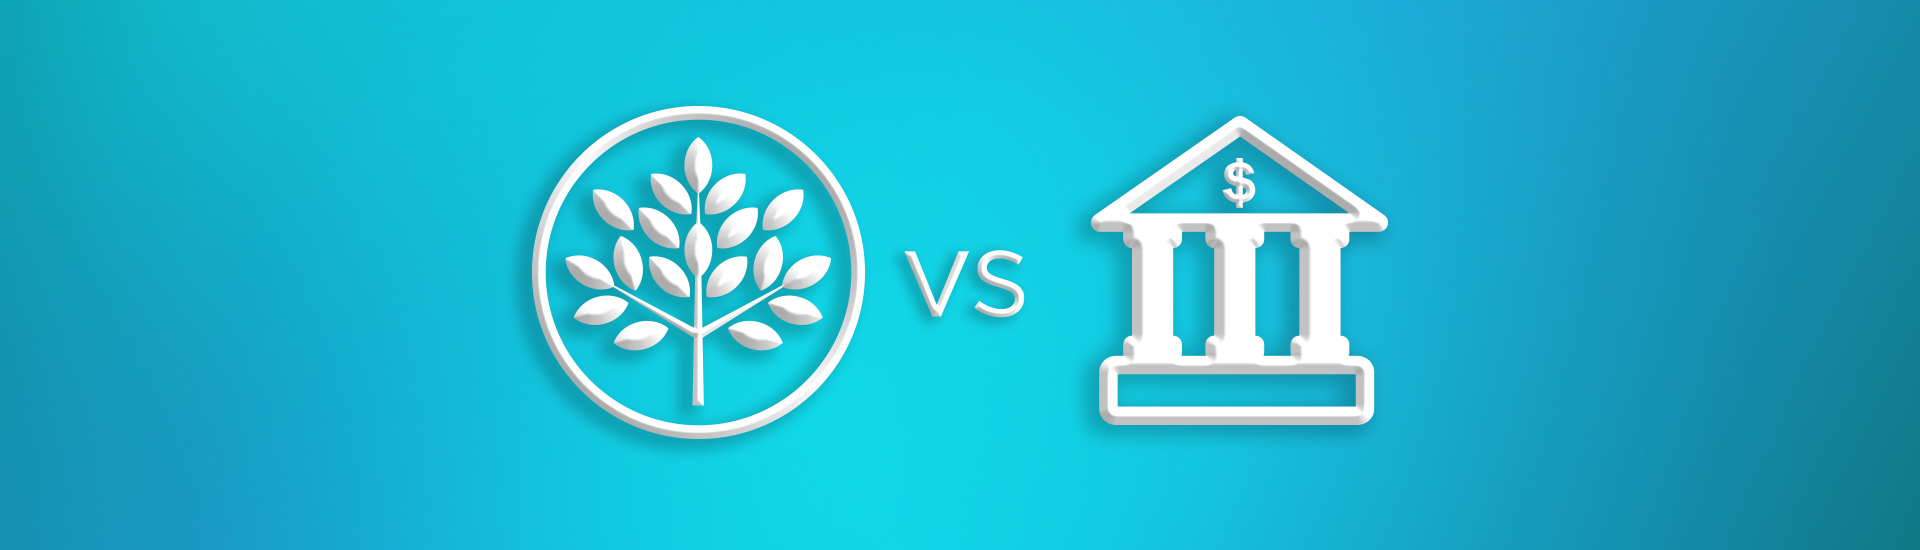 How Is a Credit Union Different Than a Bank?